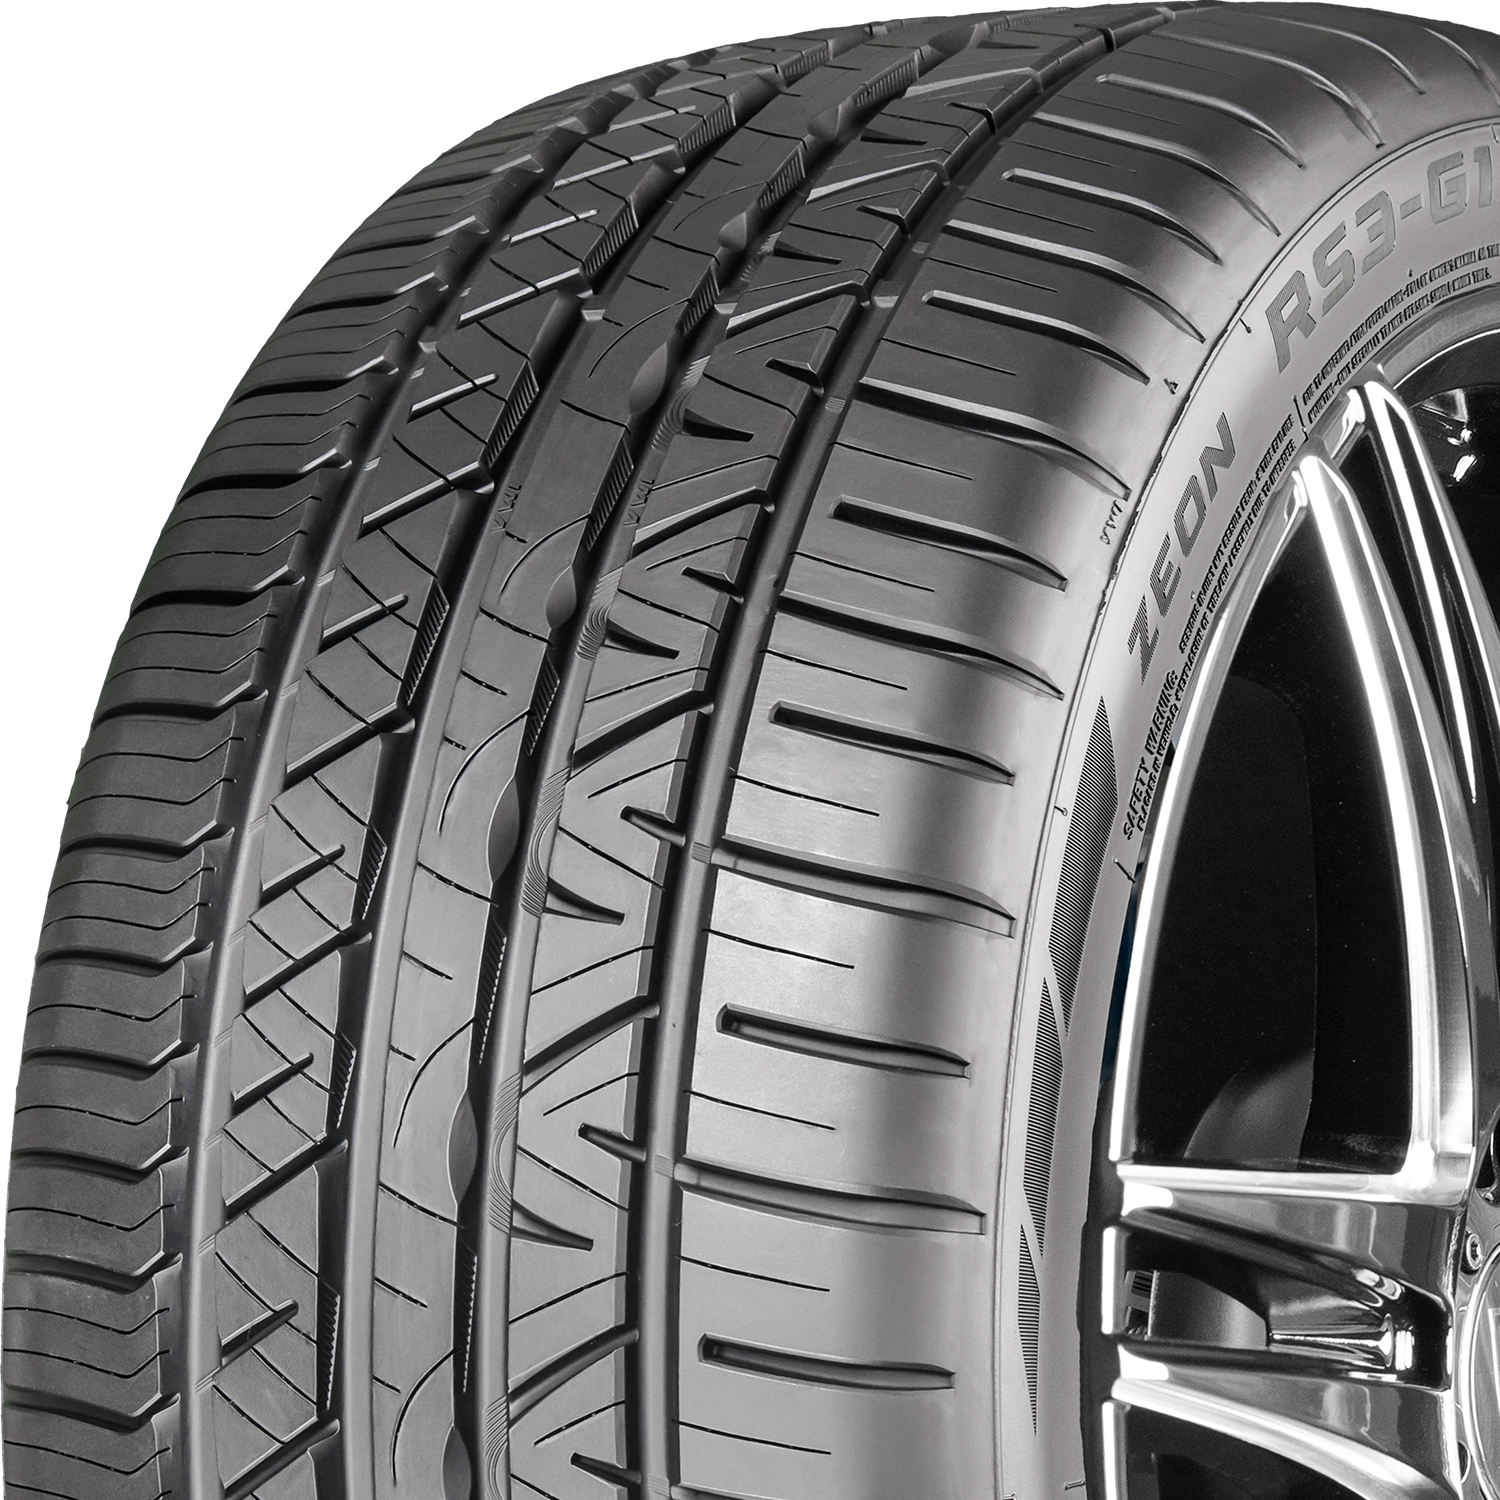 Cooper Tire Cooper Zeon RS3-G1 255/40R19 100W XL A/S High Performance